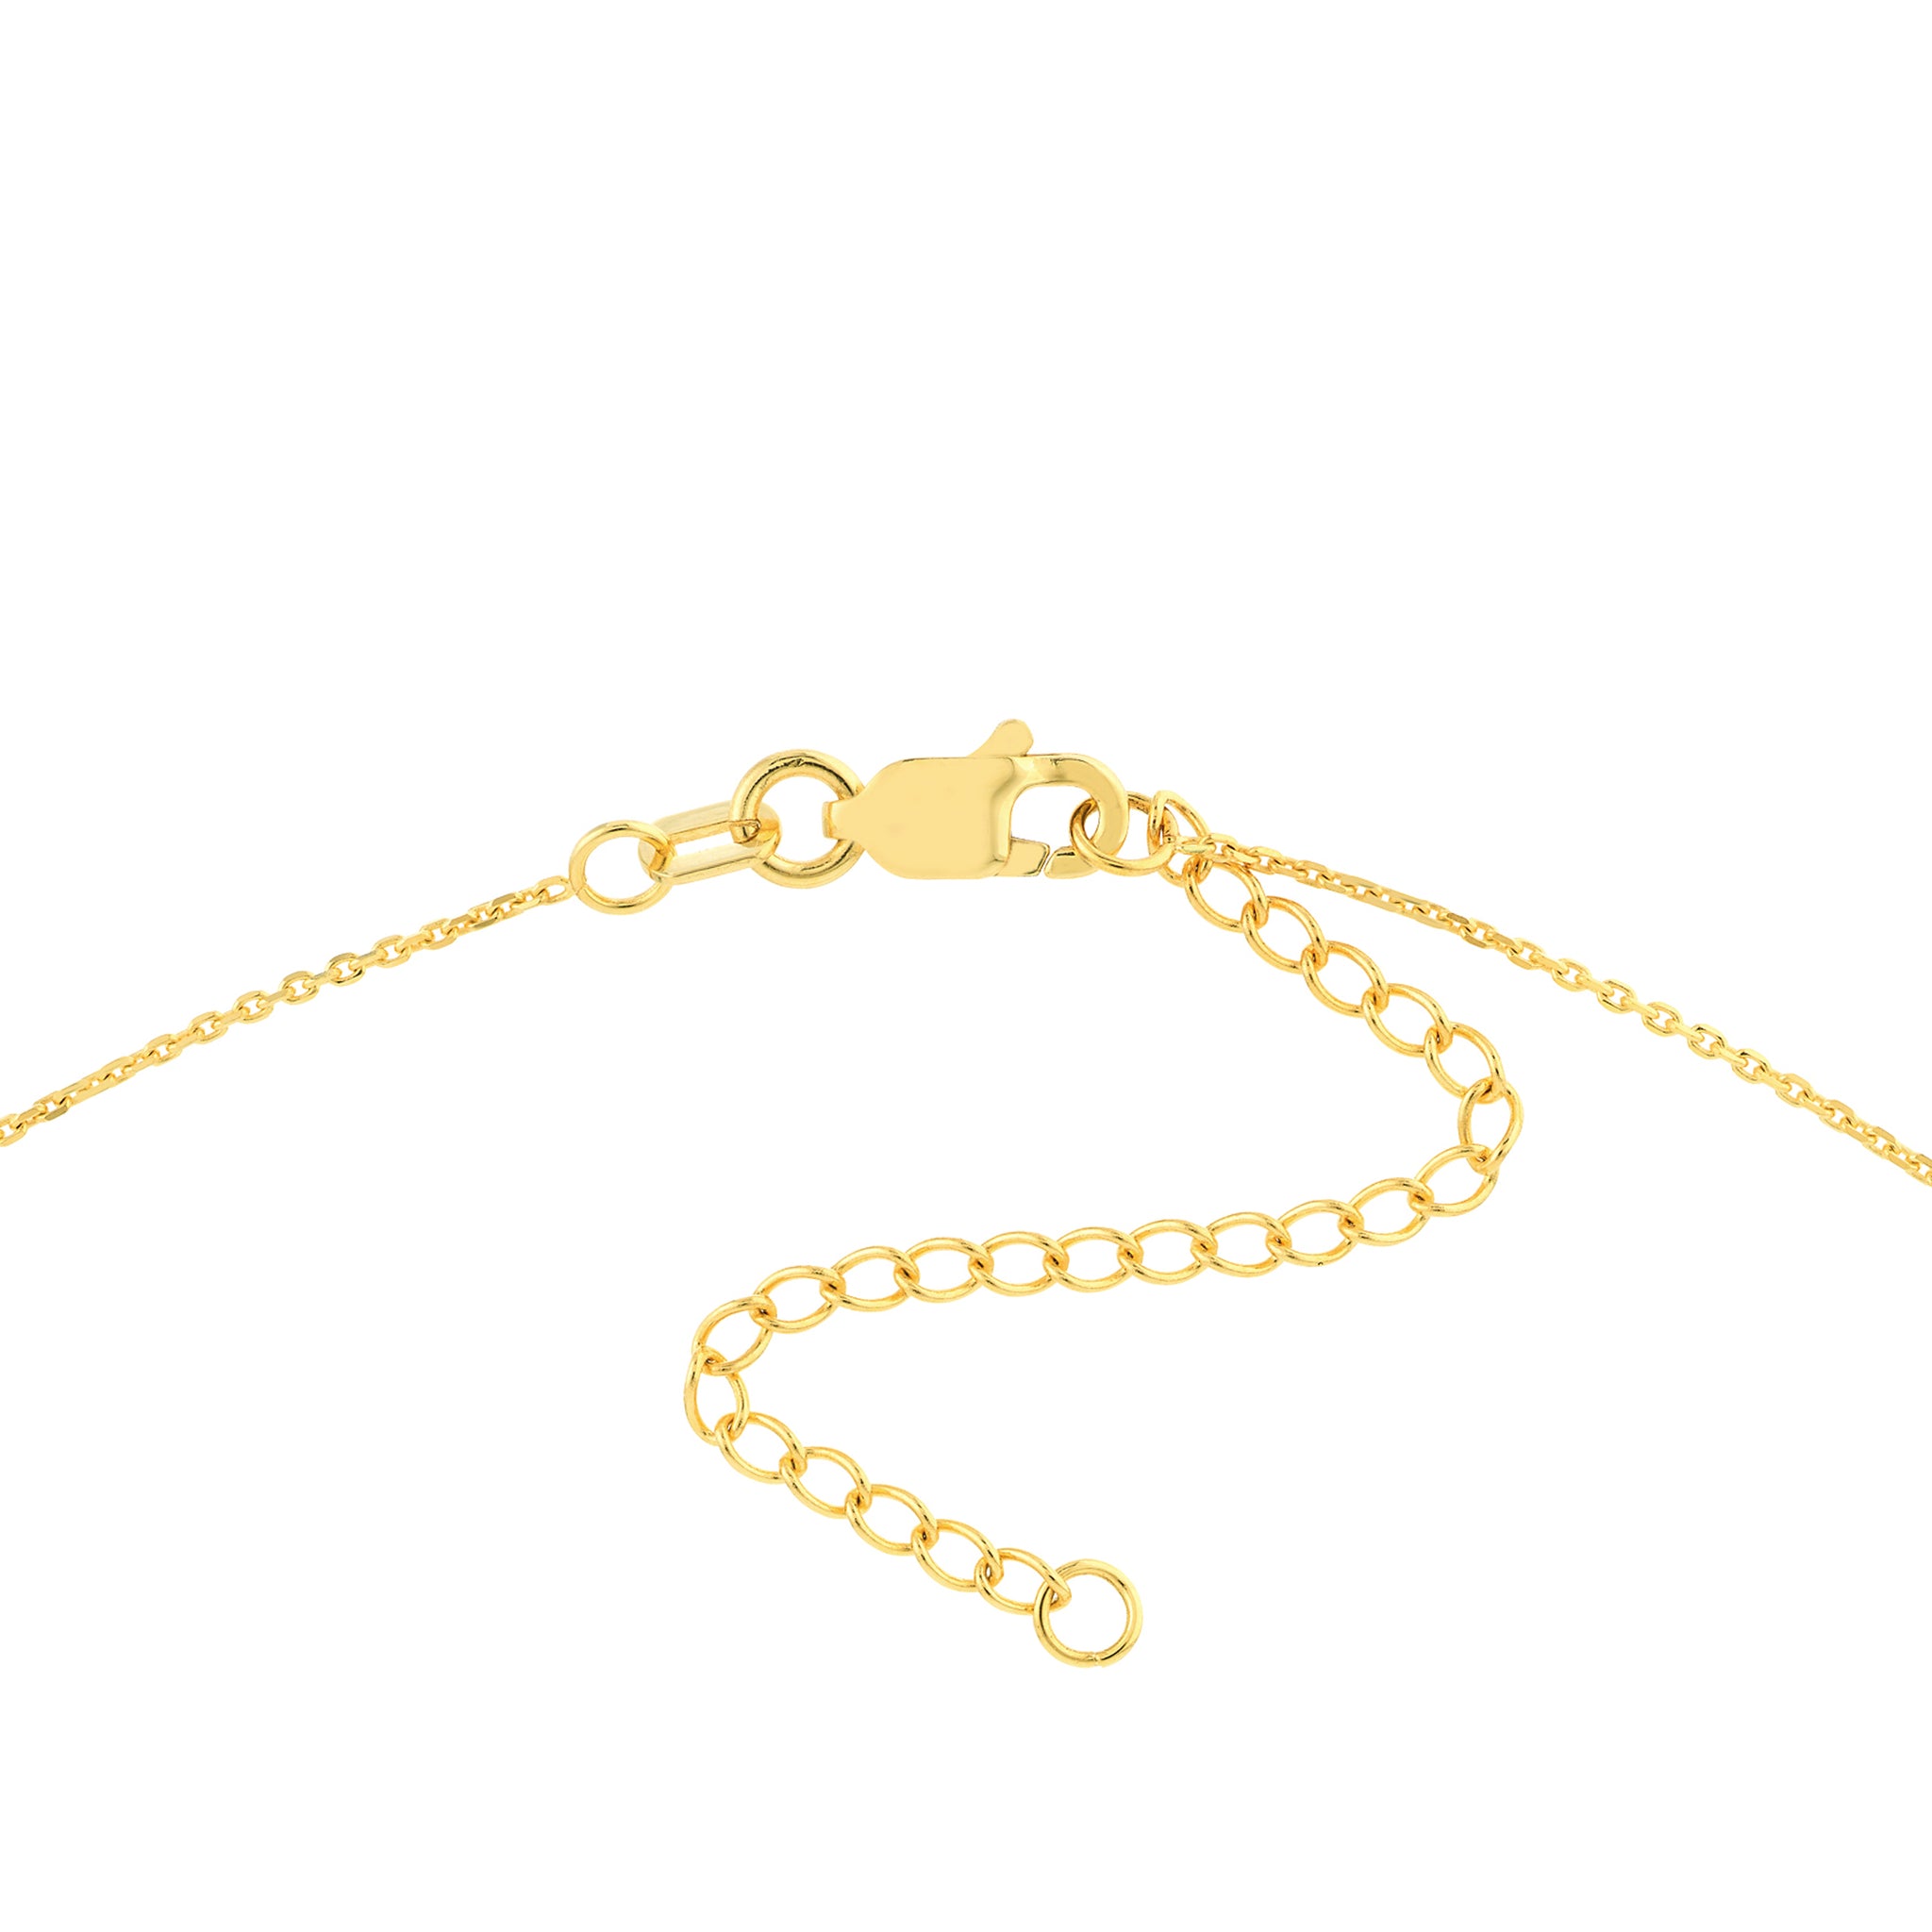 Hemsleys Collection 14K Yellow Gold Dangling Mini Disc Necklace